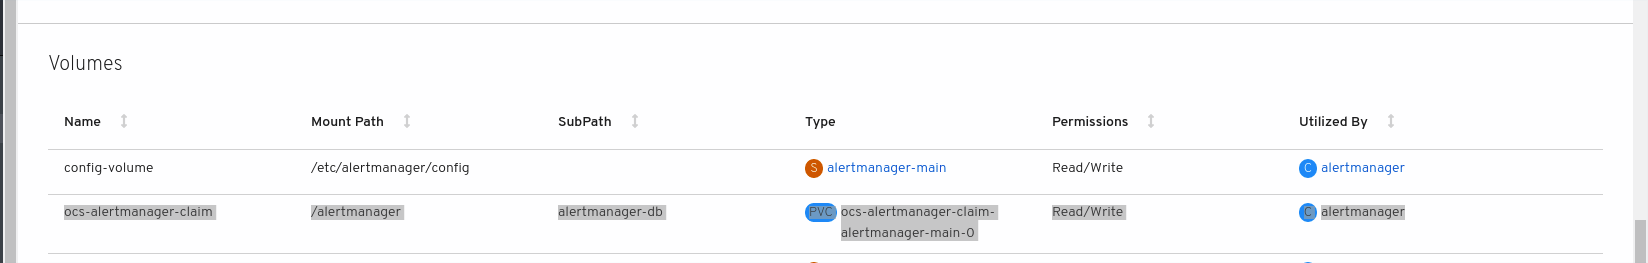 Screenshot of OpenShift Web Console showing persistent volume claim attached to the altermanager pod